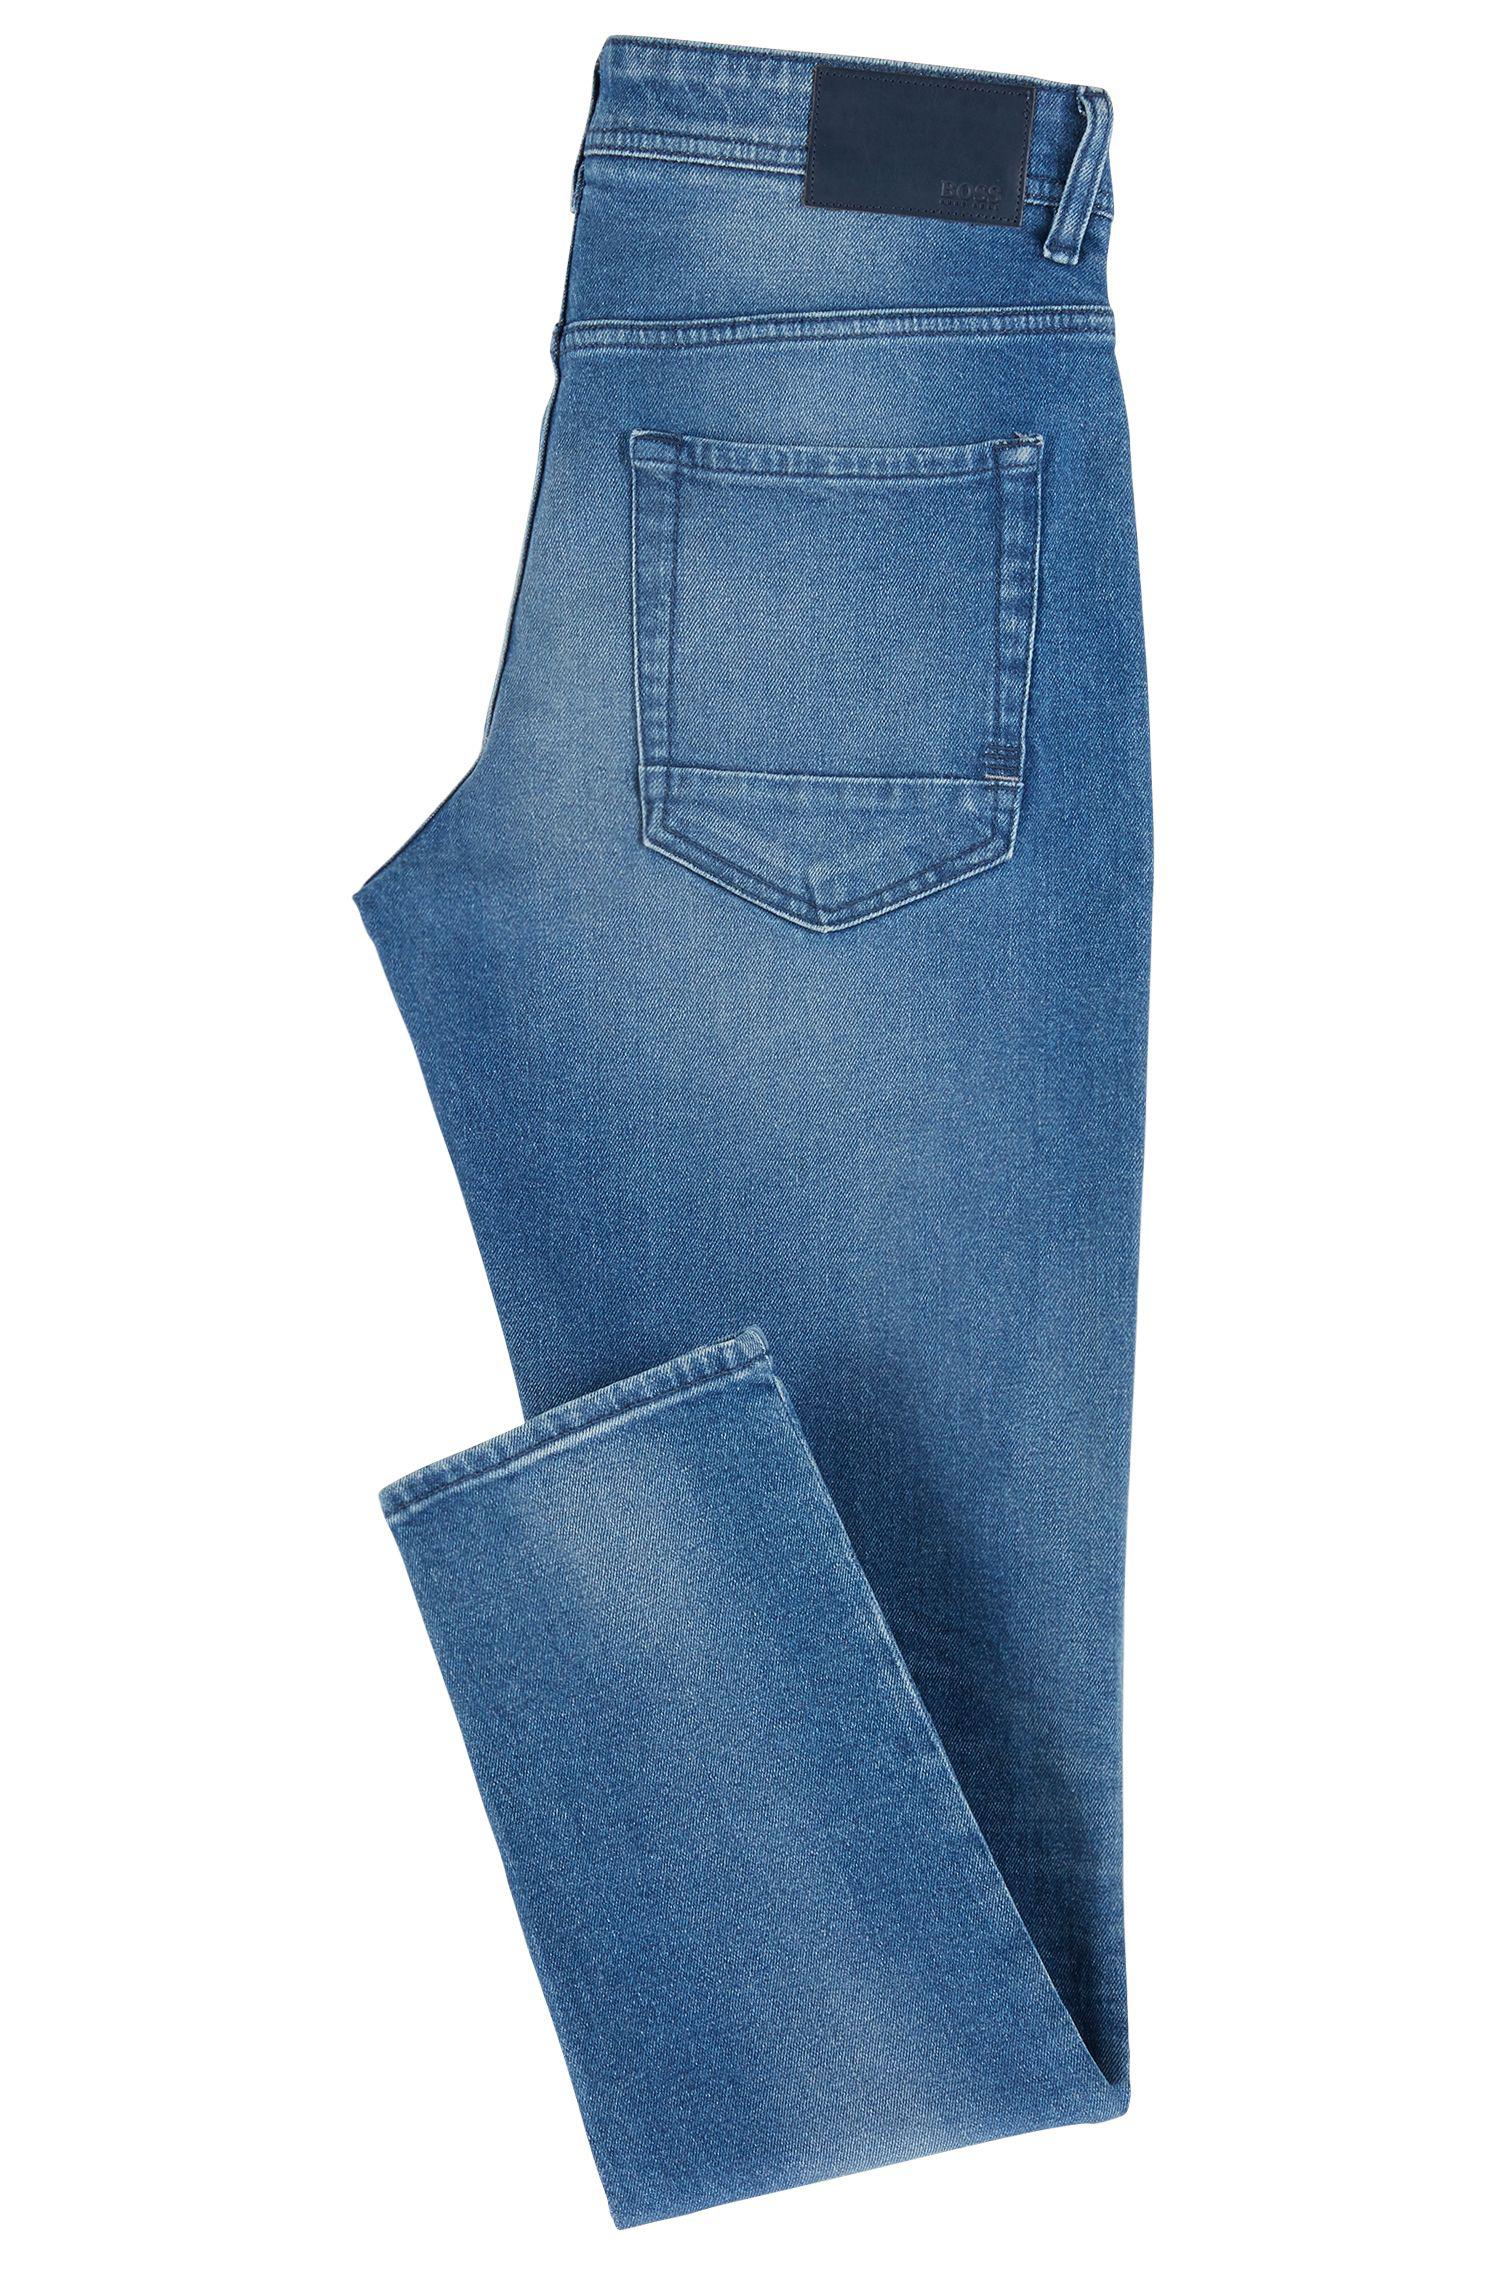 BOSS Tapered-fit Jeans In Vintage-look Comfort-stretch Denim in Blue ...